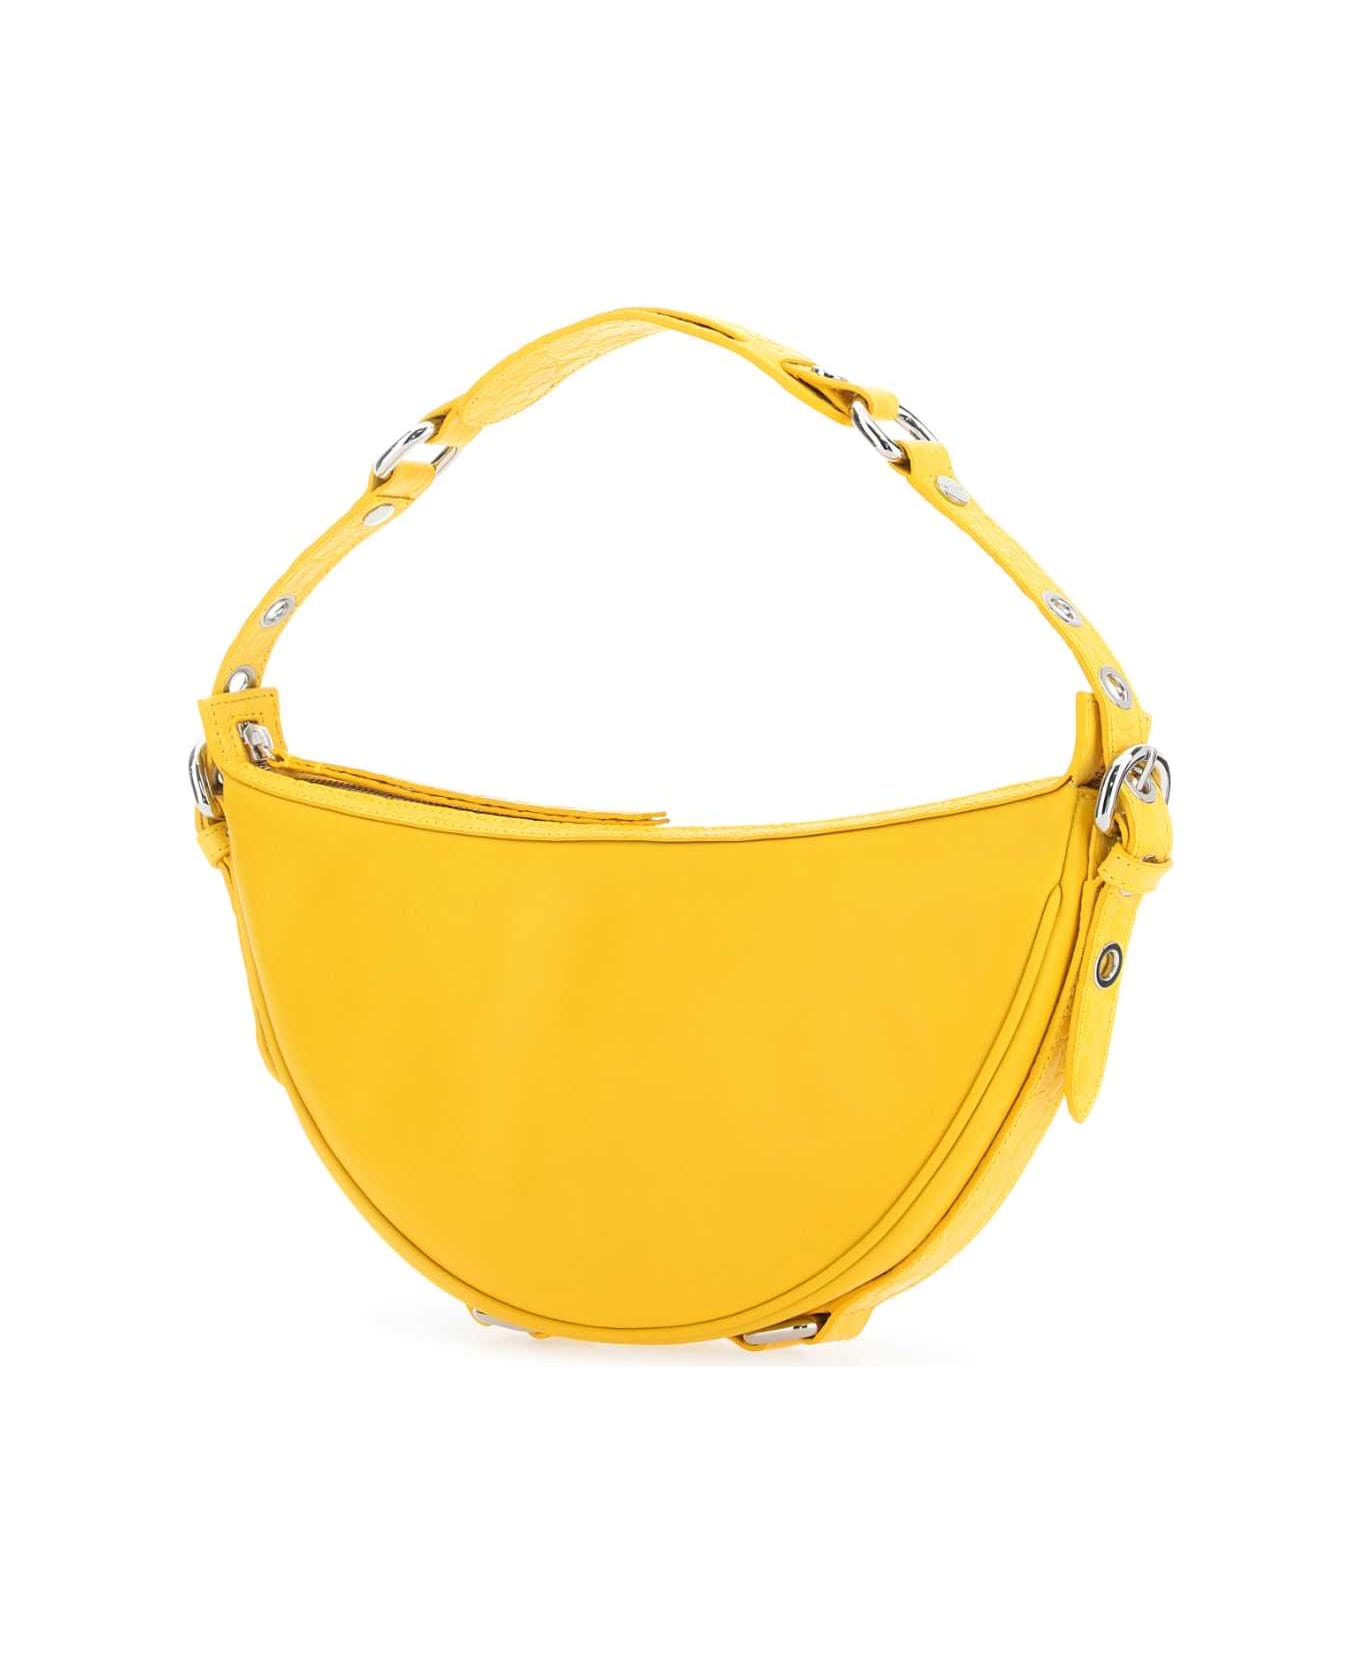 BY FAR Yellow Leather Gib Shoulder Bag - Yellow トートバッグ